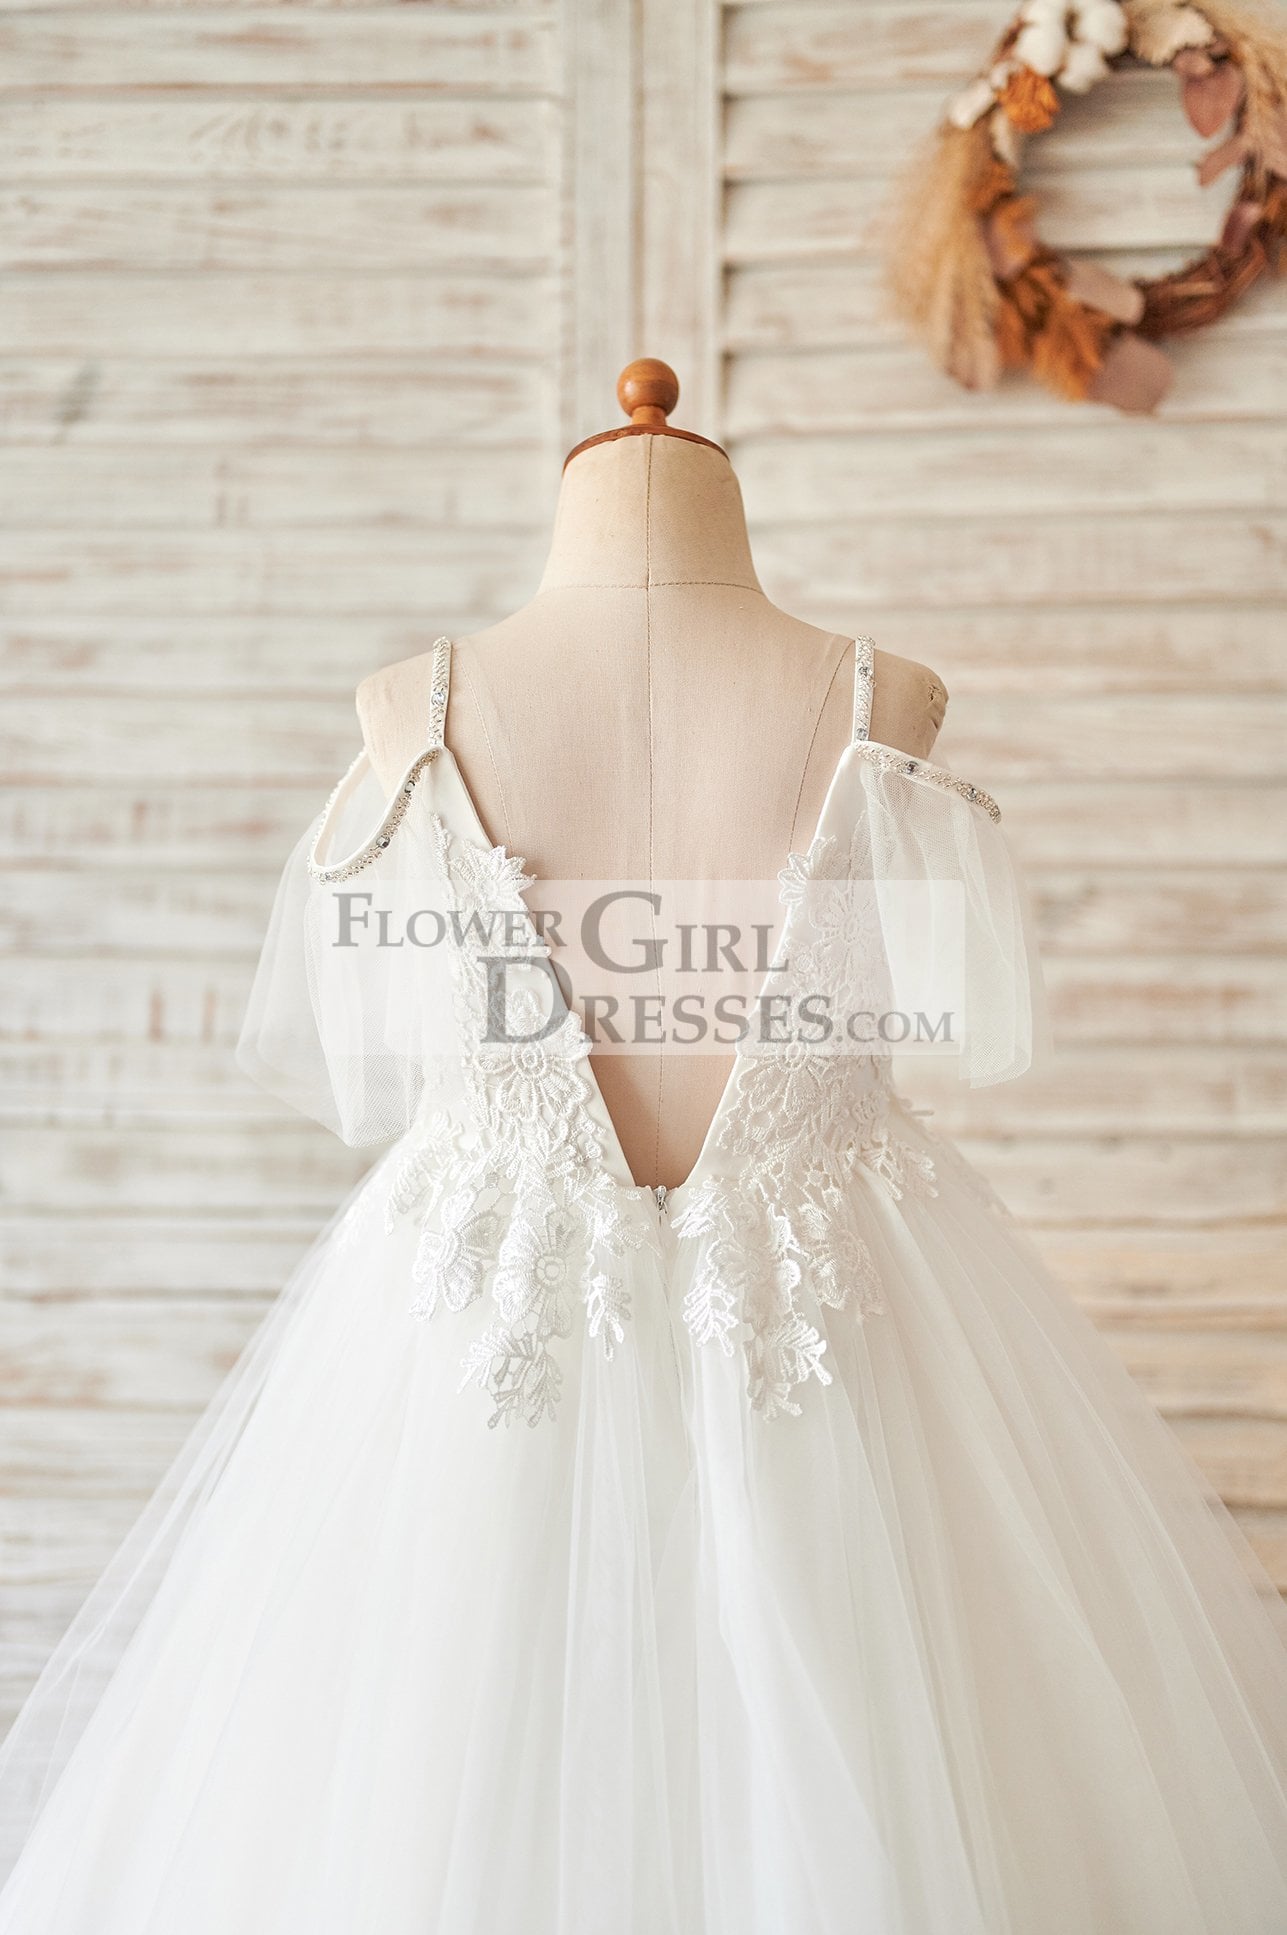 Off Shoulder Ivory Lace Tulle Ball Gown Wedding Flower Girl Dress